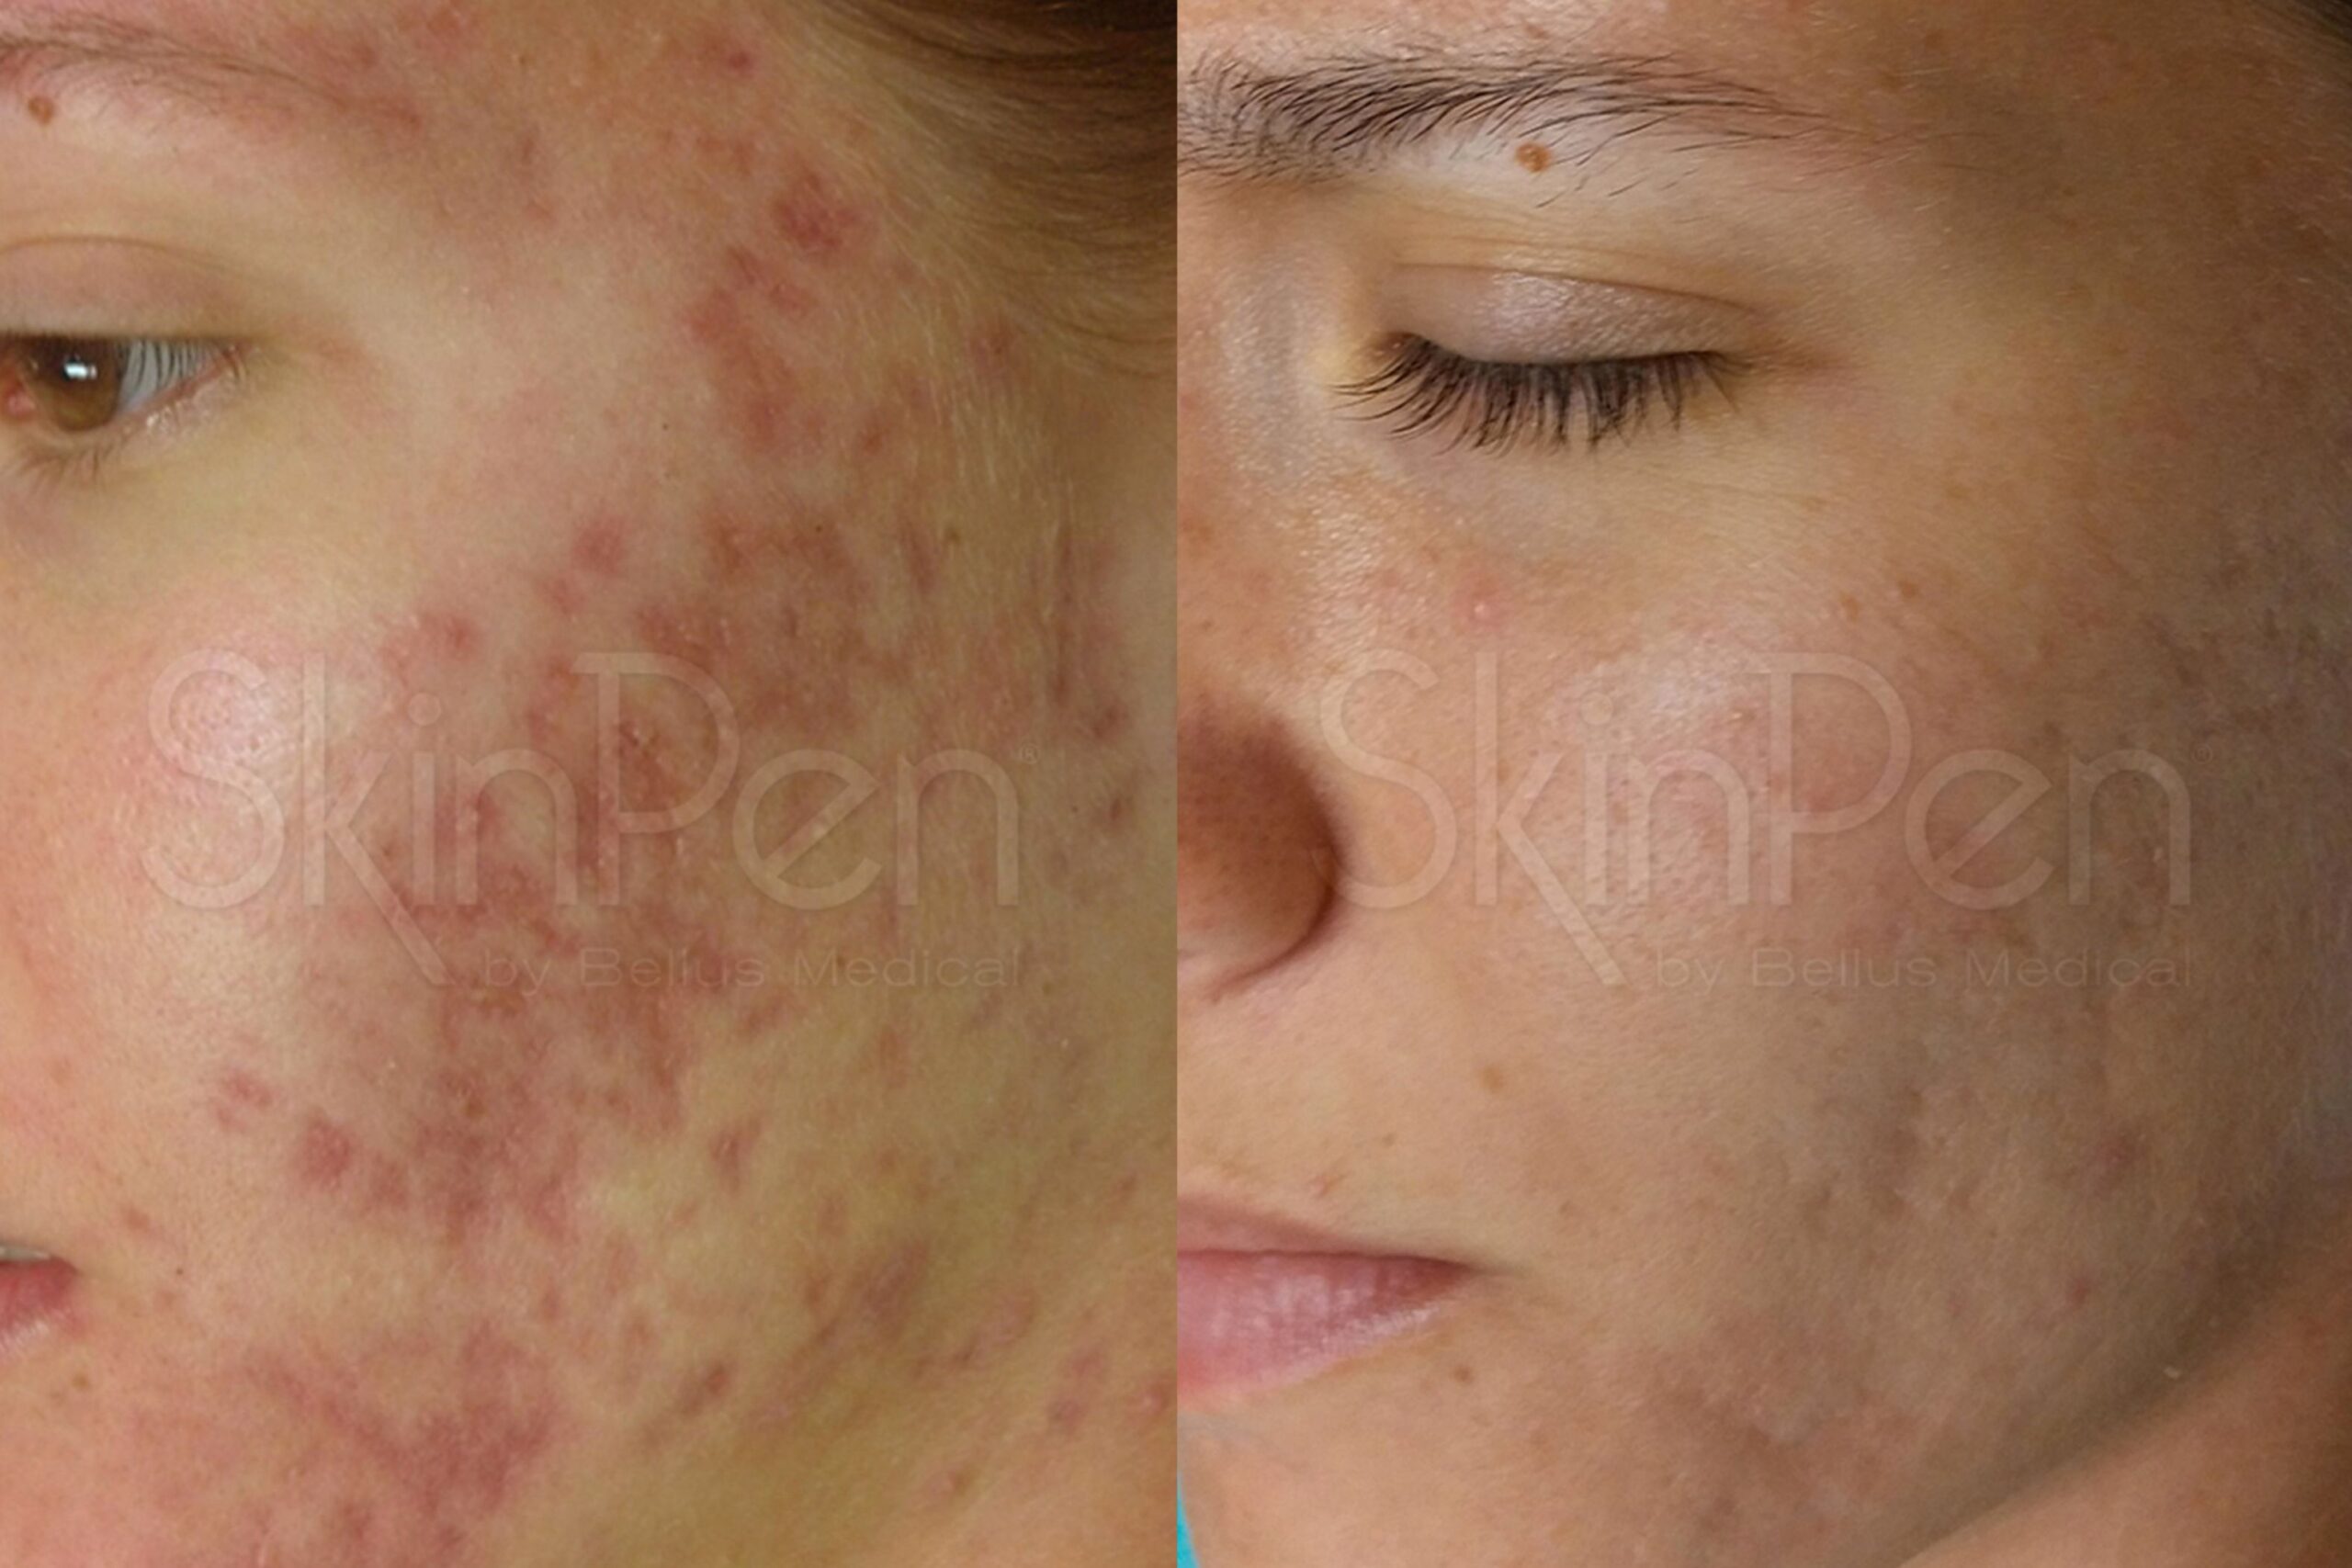 SkinPen Microneedling for Acne Scaring, Before and After Image